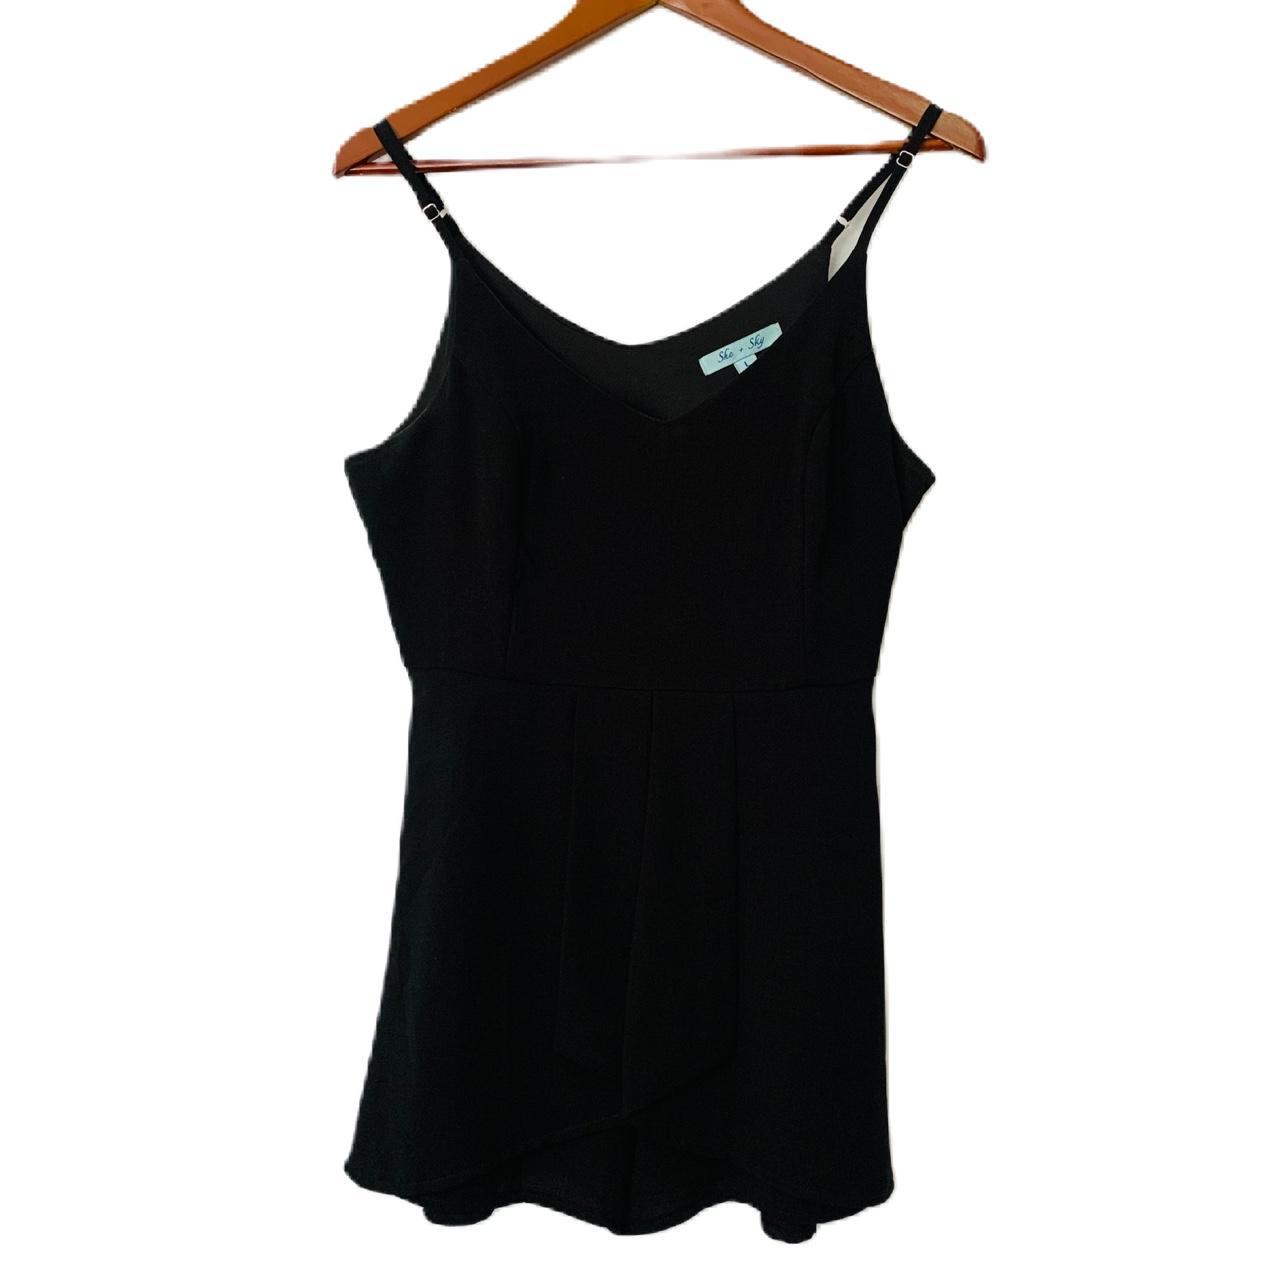 Shein womens black camisole top size small with adjustable spaghetti straps